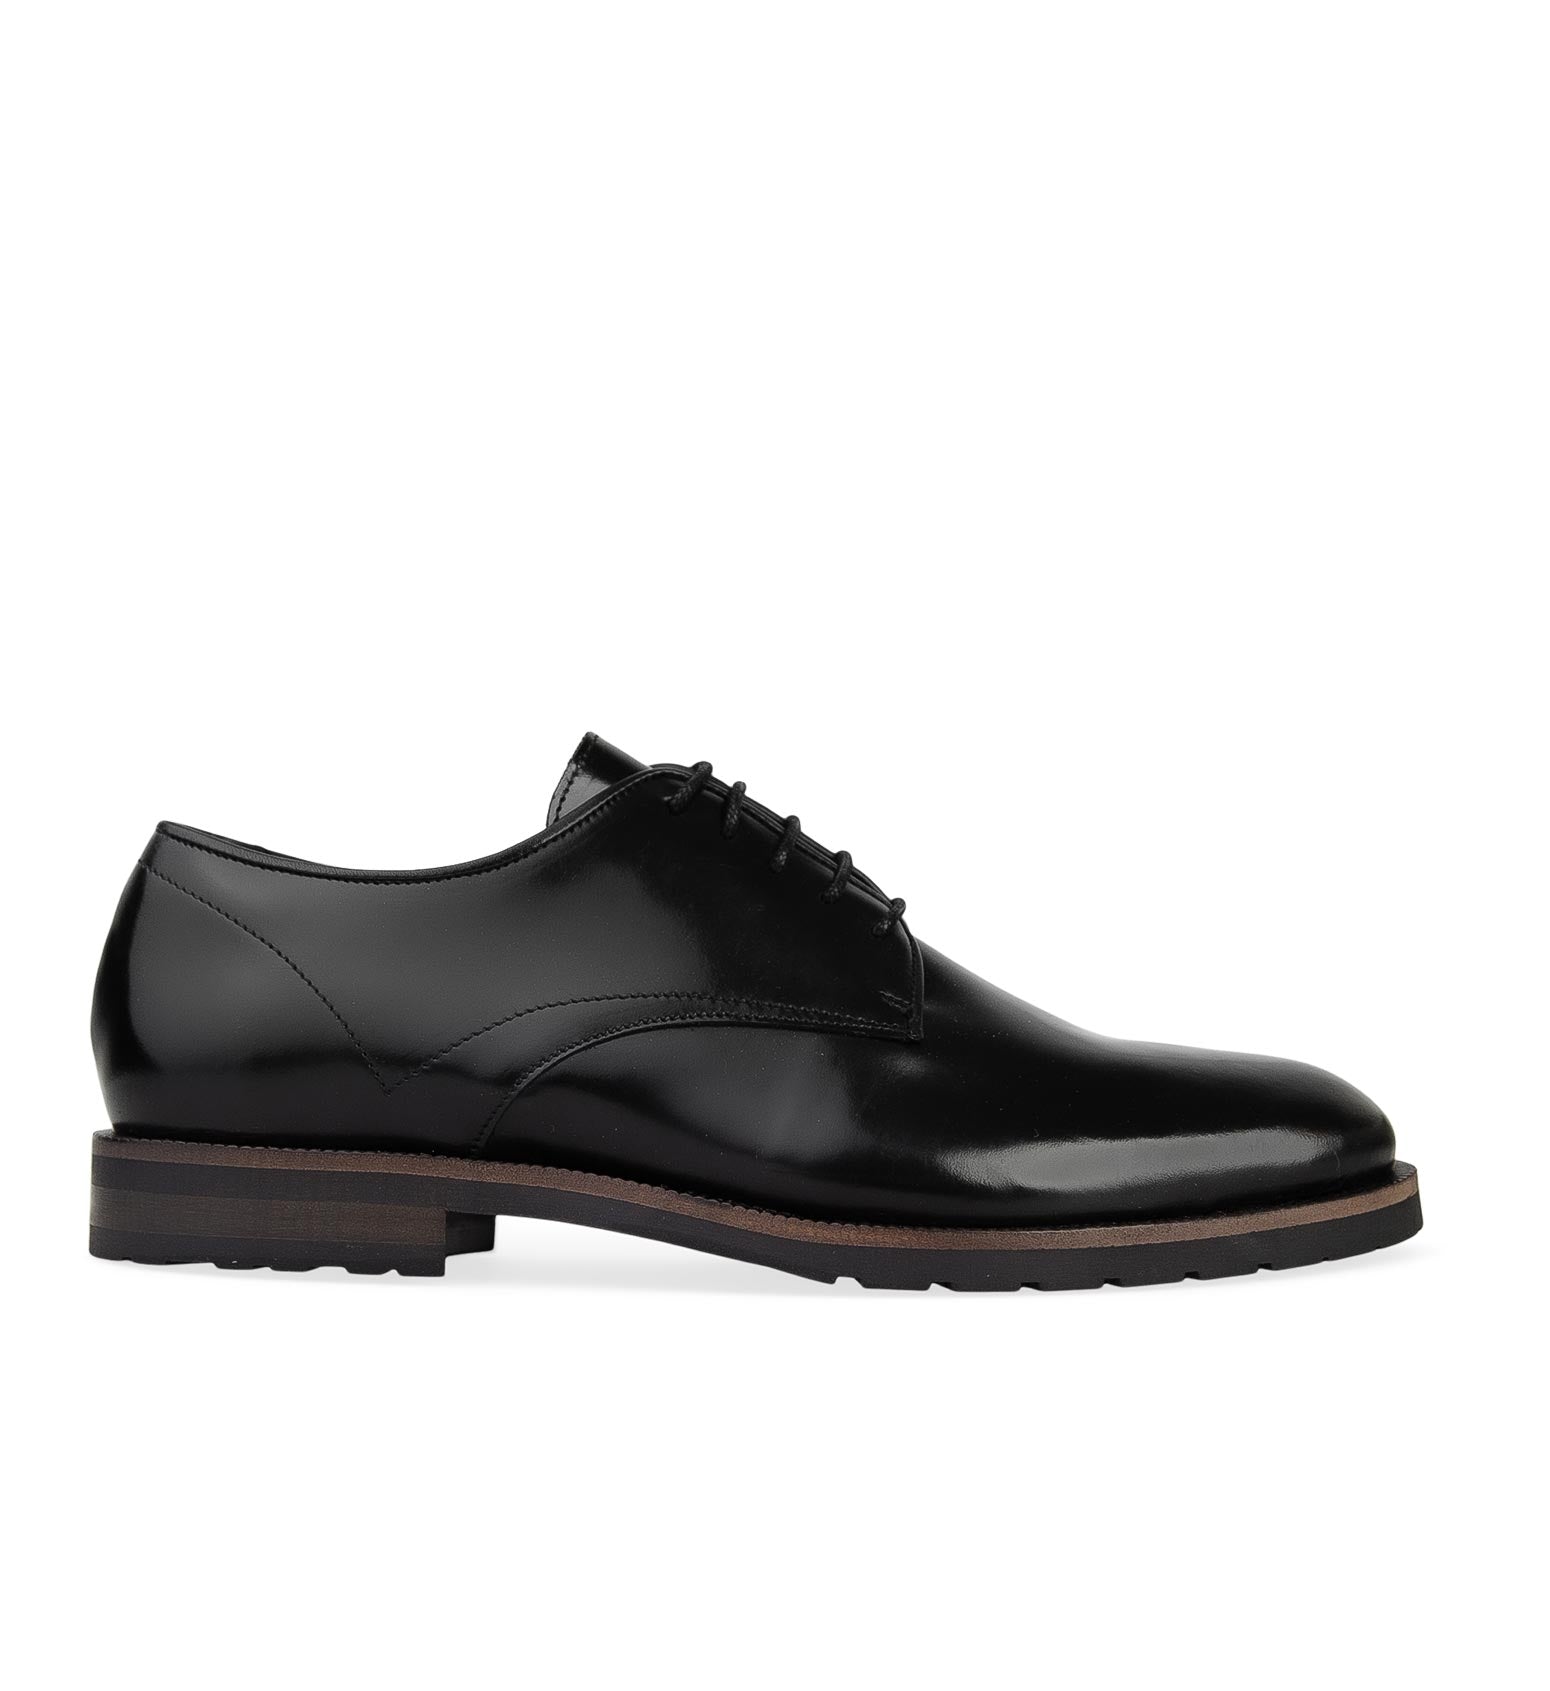 Lutetium Black Polished Leather Lace Up Dress Shoes | Bared Footwear